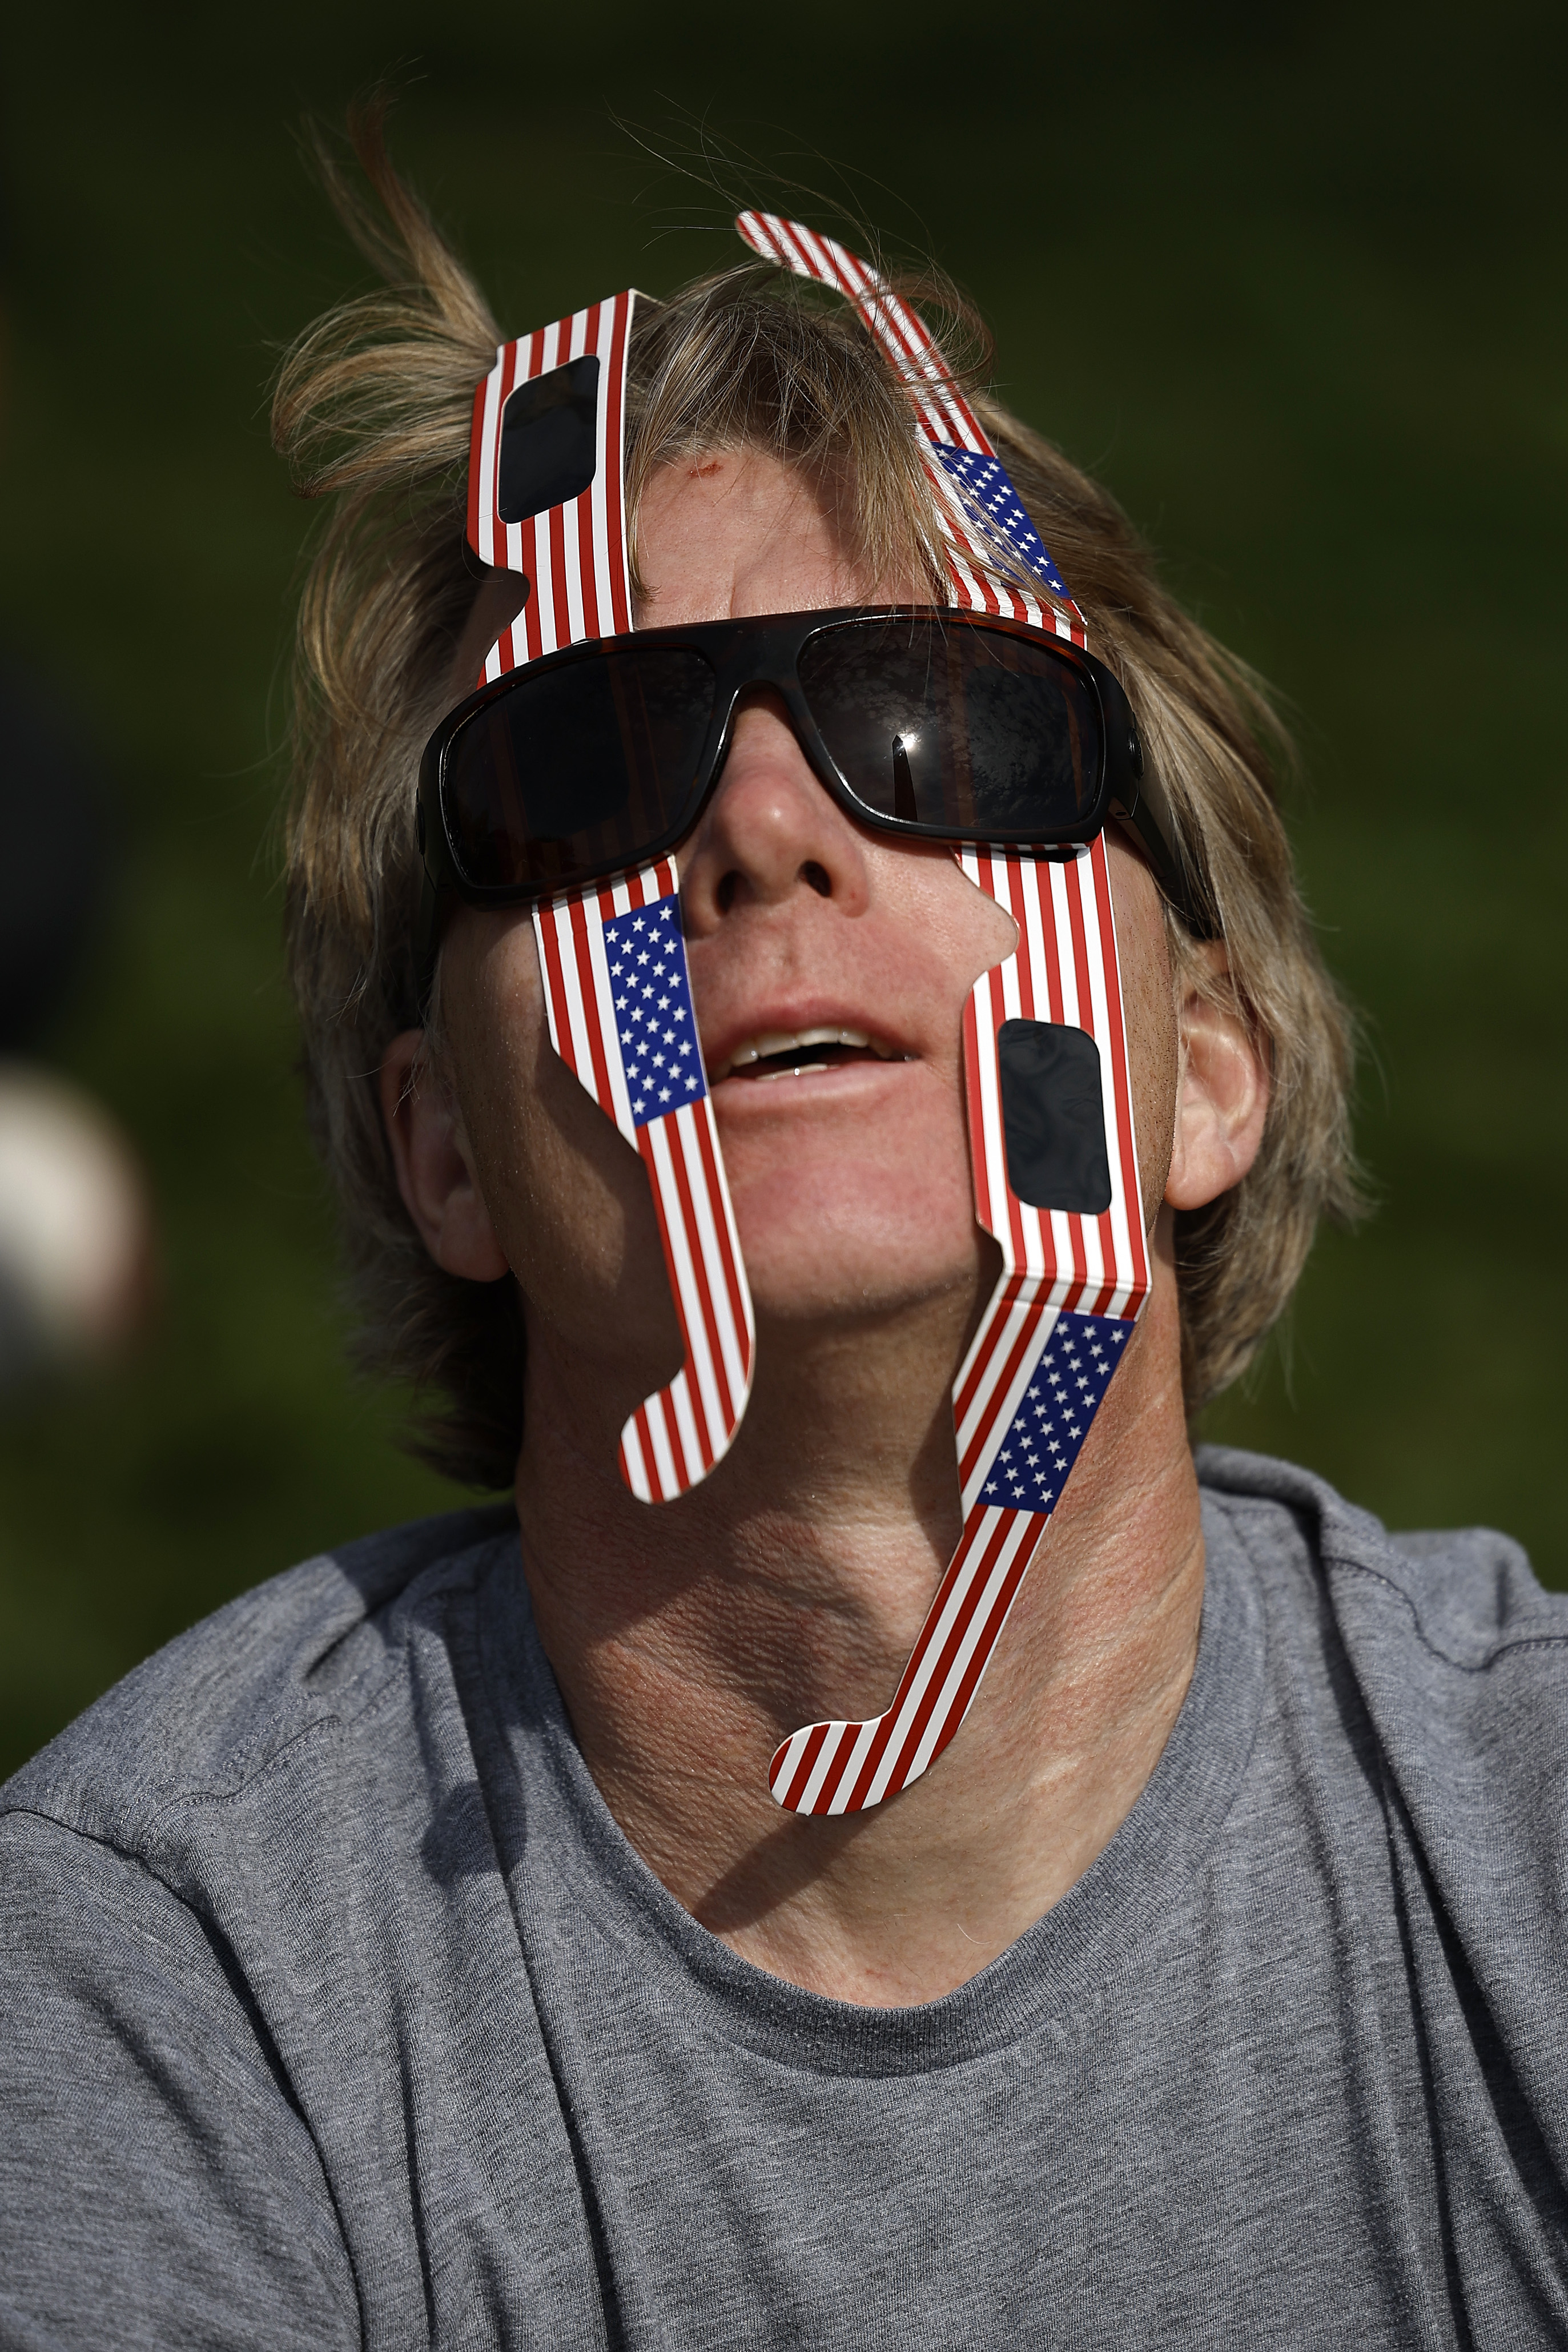 Person wearing sunglasses and patriotic ribbon, looking upward with an open mouth